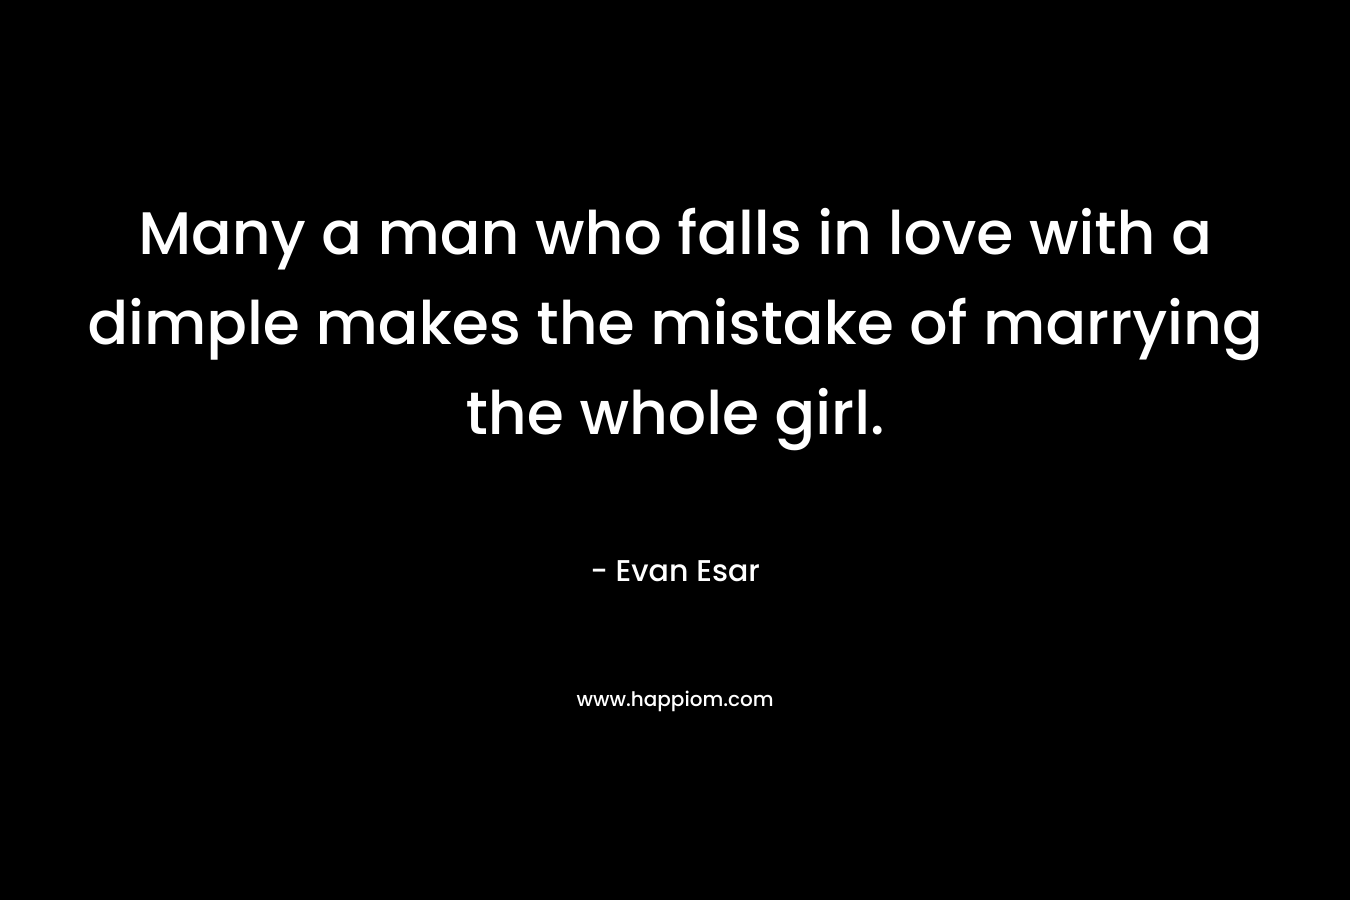 Many a man who falls in love with a dimple makes the mistake of marrying the whole girl.